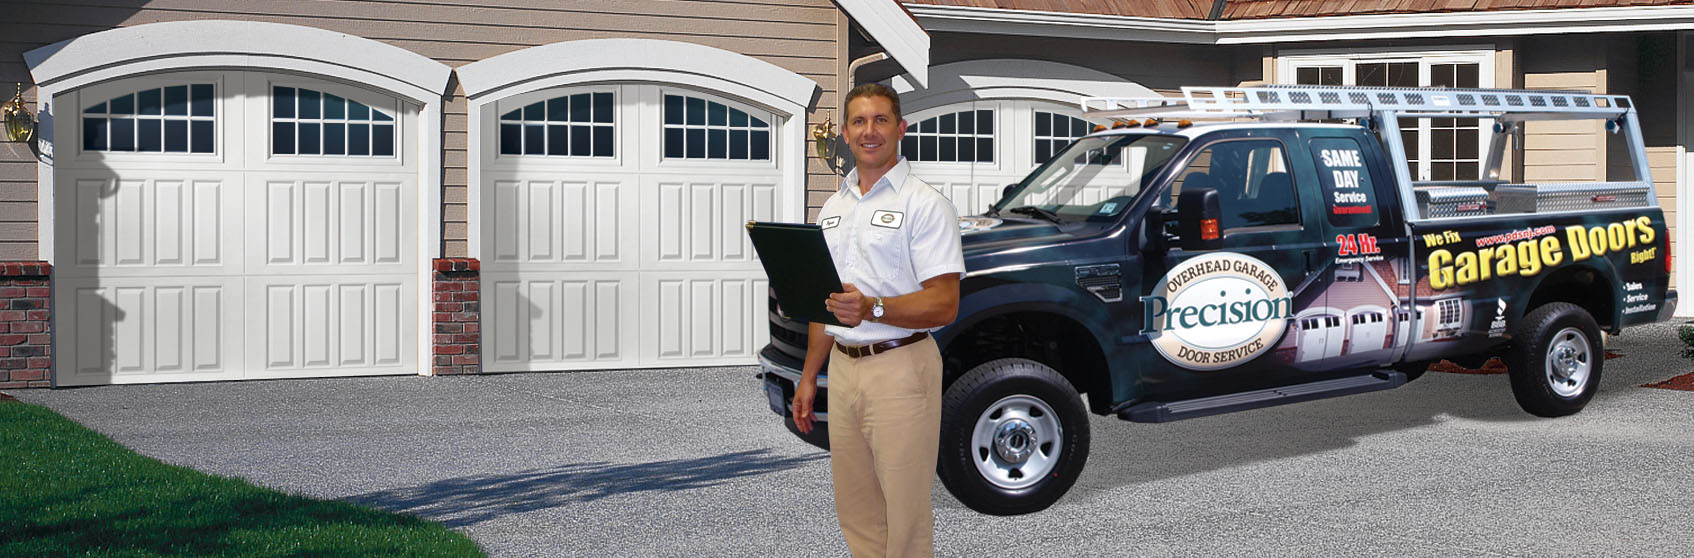 Precision Garage Door Westchester County Ny Repair New Garage throughout size 1694 X 558